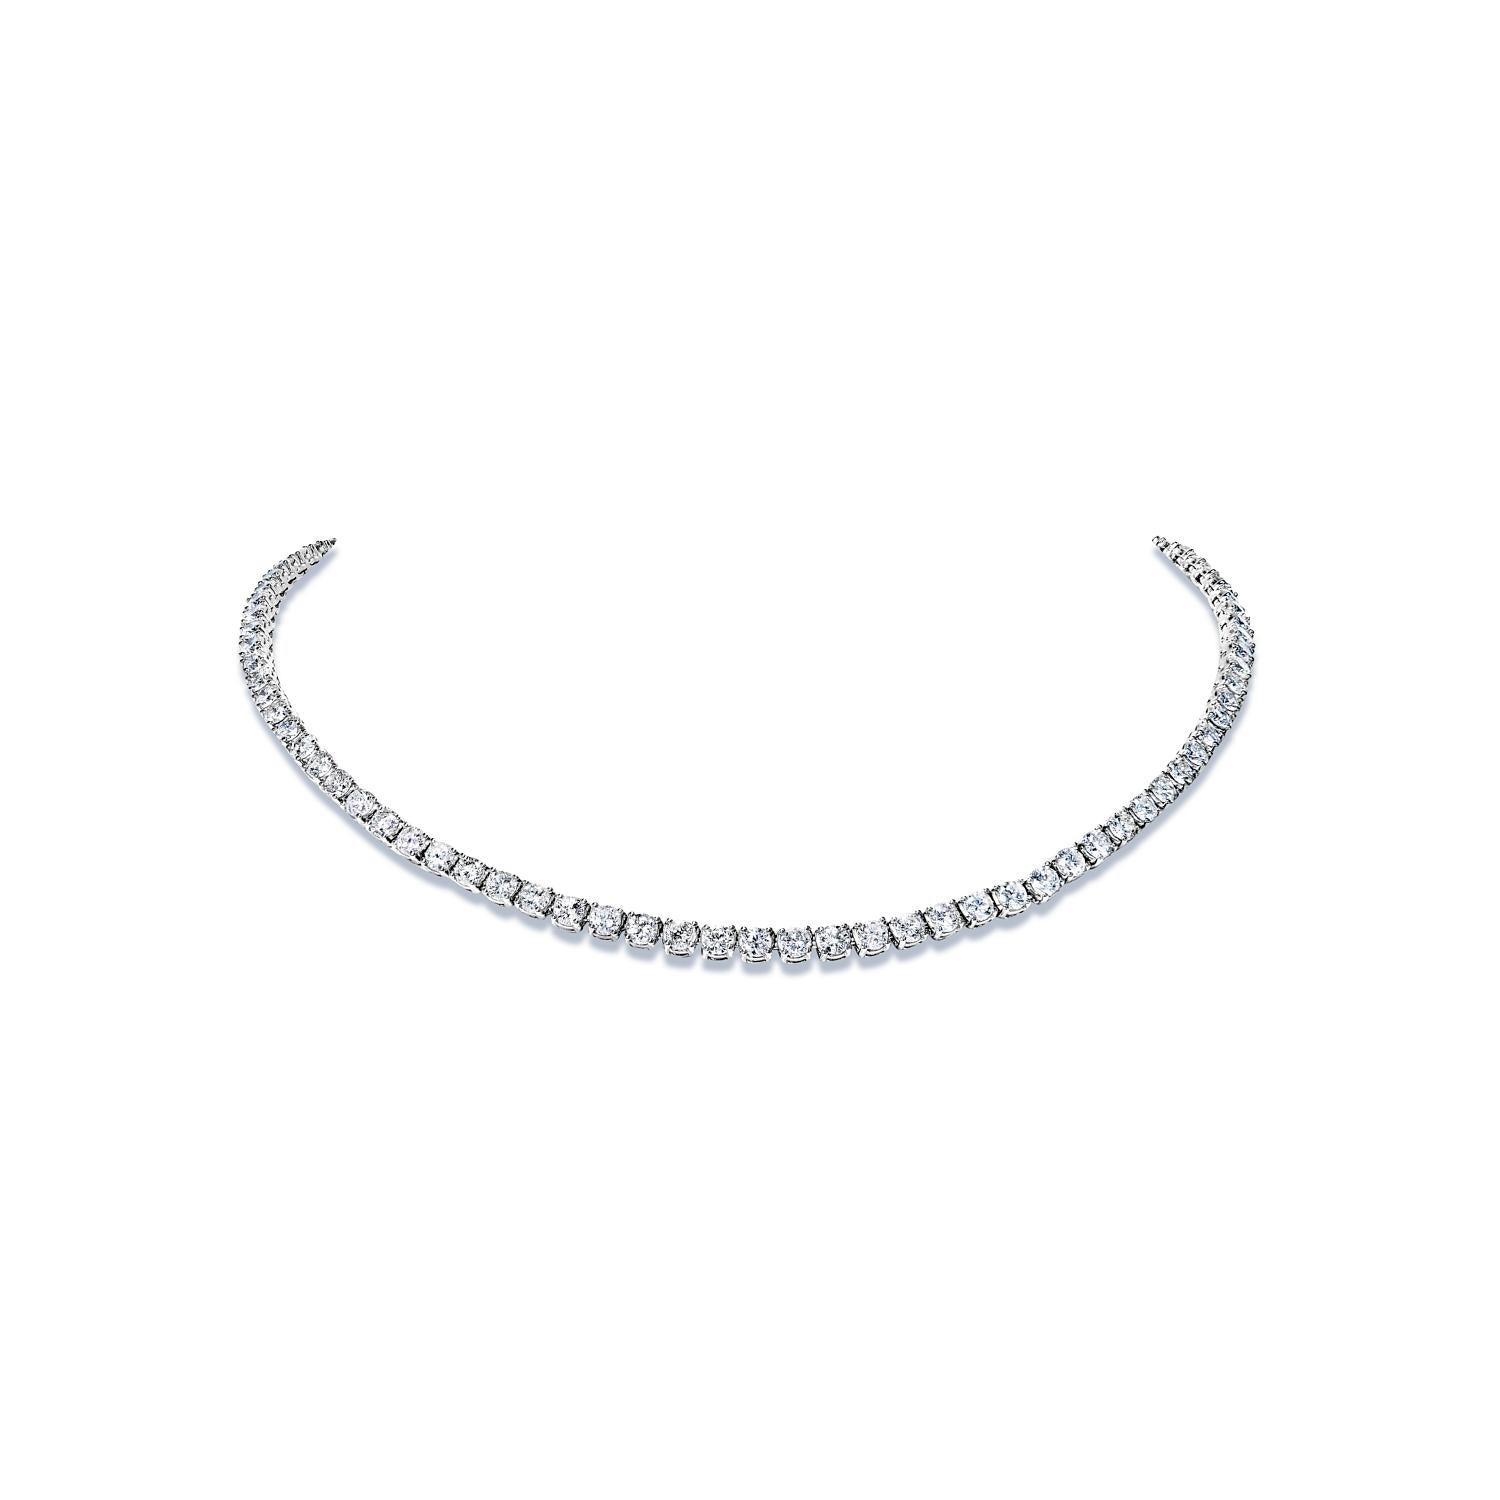 Earth Mined Diamond:
Carat Weight: 18.68 Carats
Style: Round Brilliant Cut
Chains: 14 Karat White Gold 26.60 grams